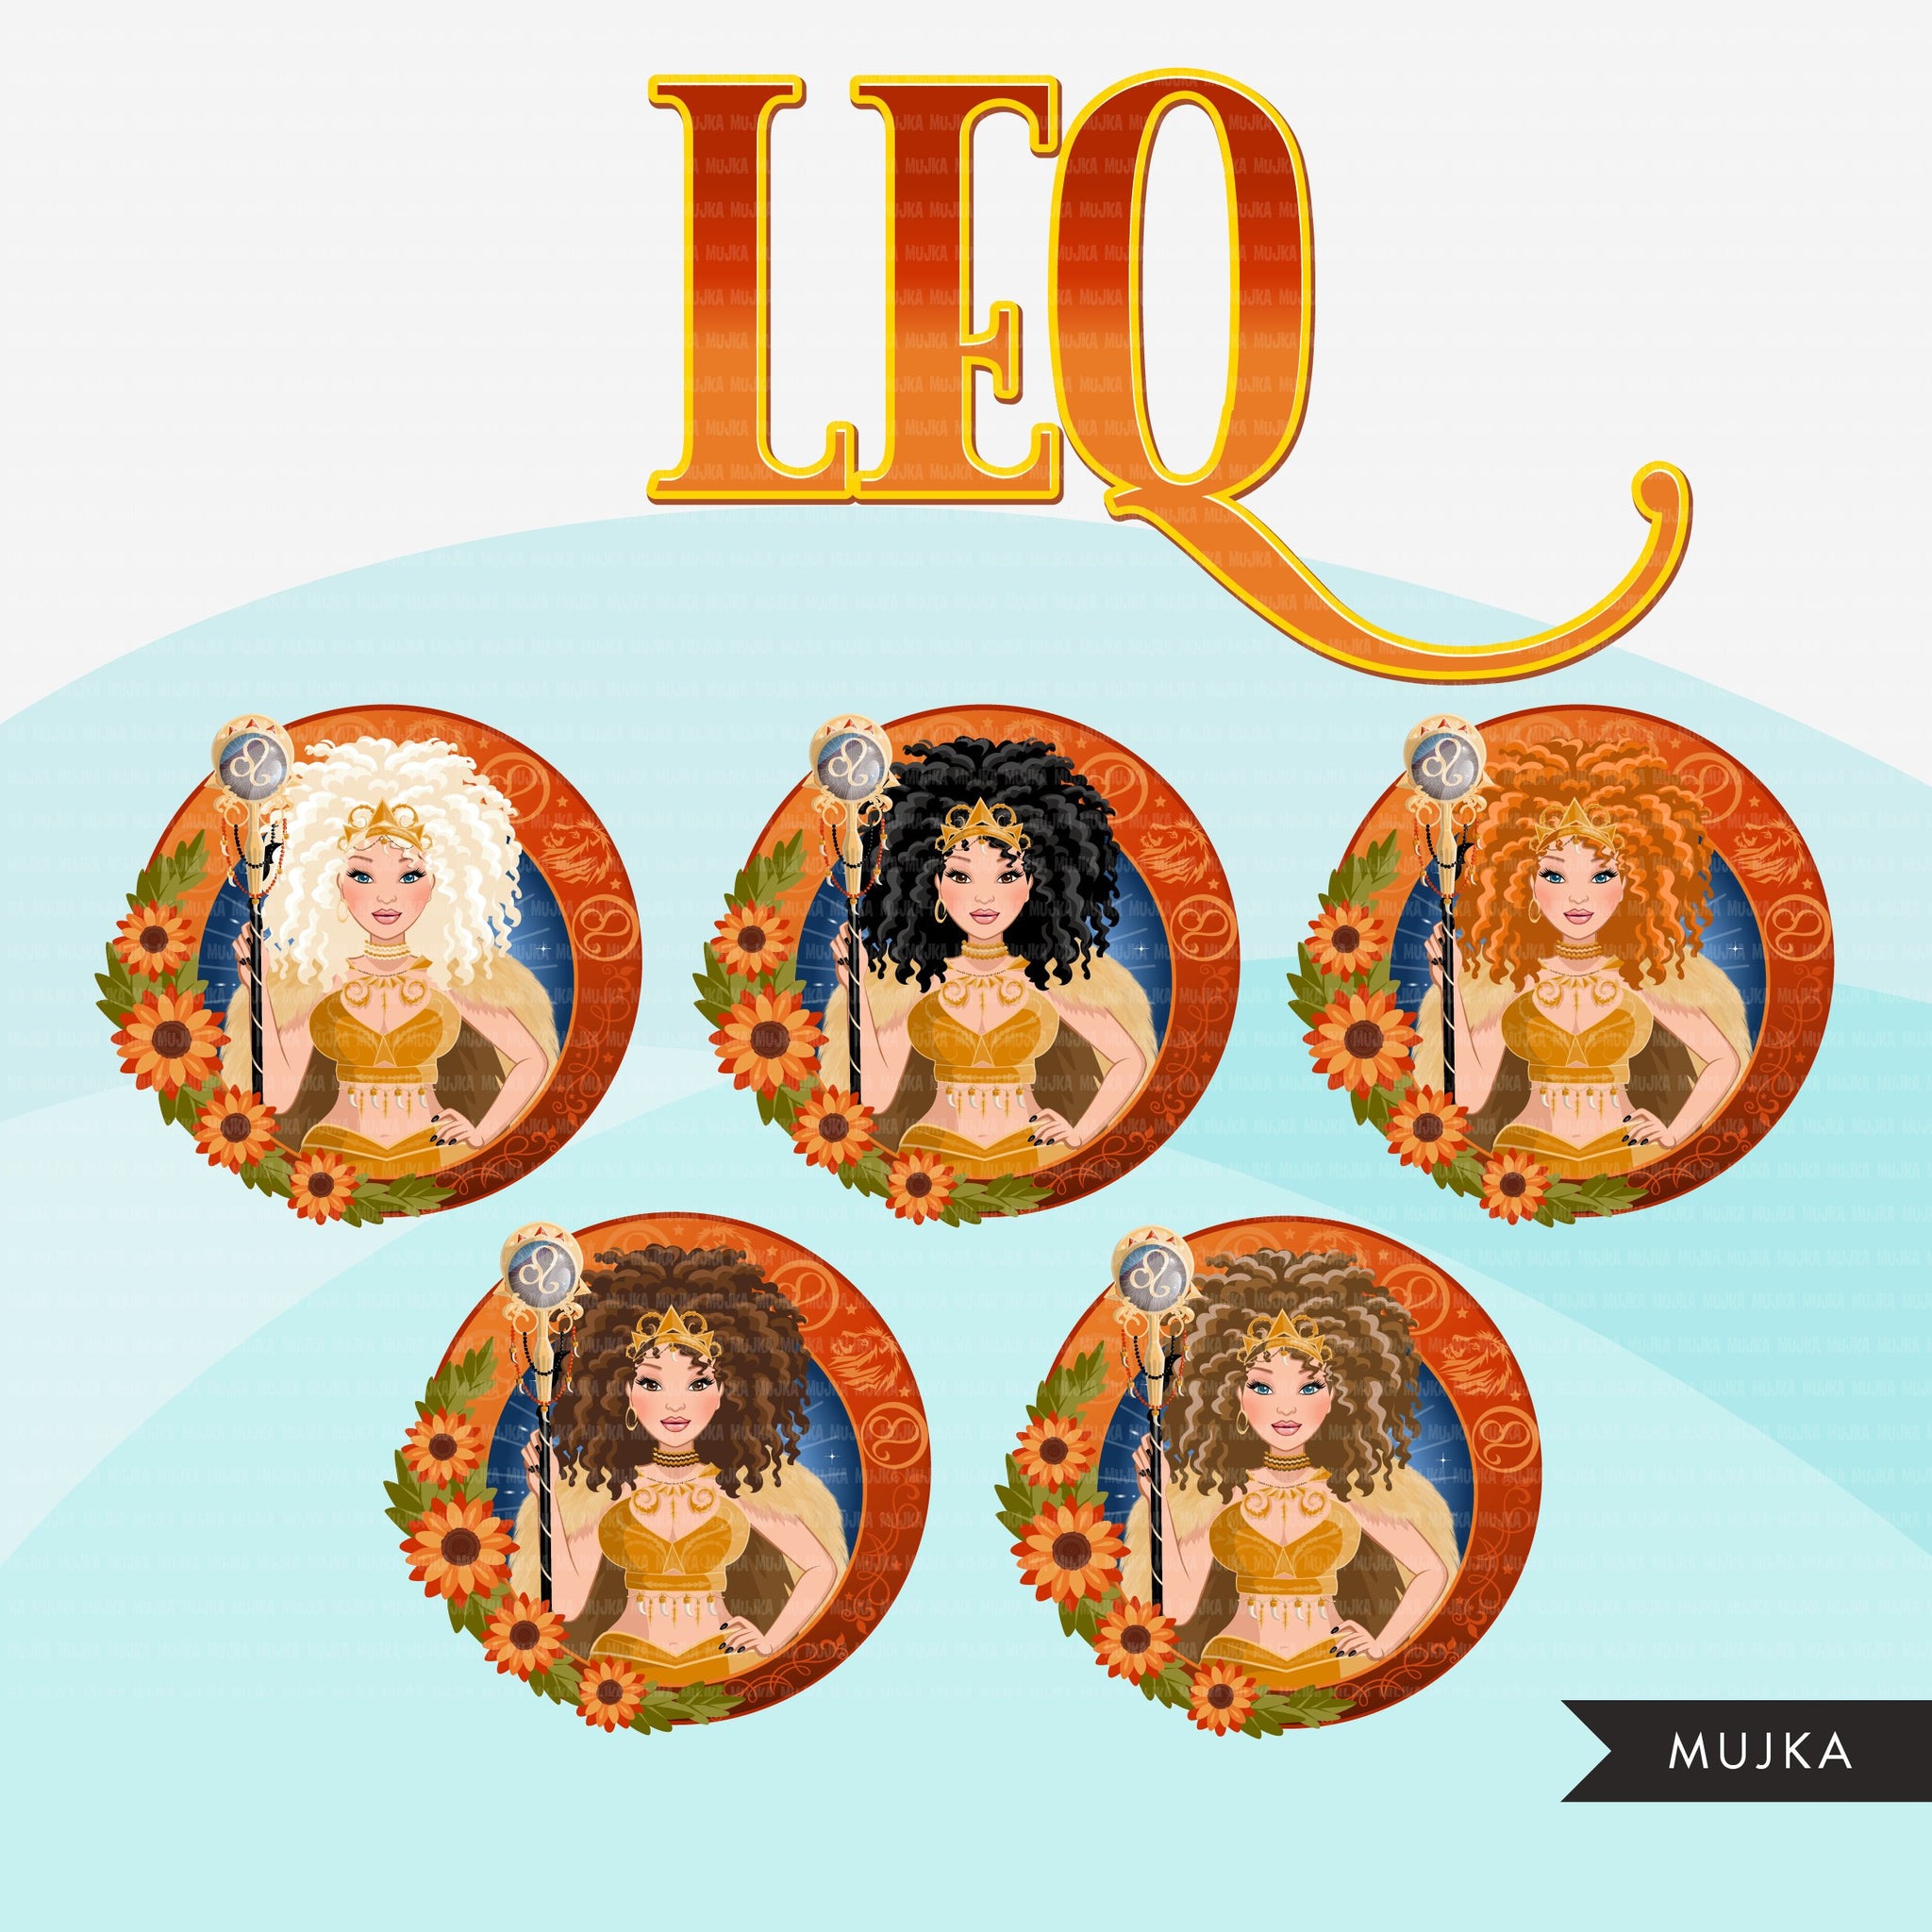 Zodiac Leo Clipart, Png digital download, Sublimation Graphics for Cricut & Cameo, Caucasian curly hair Woman Horoscope sign designs